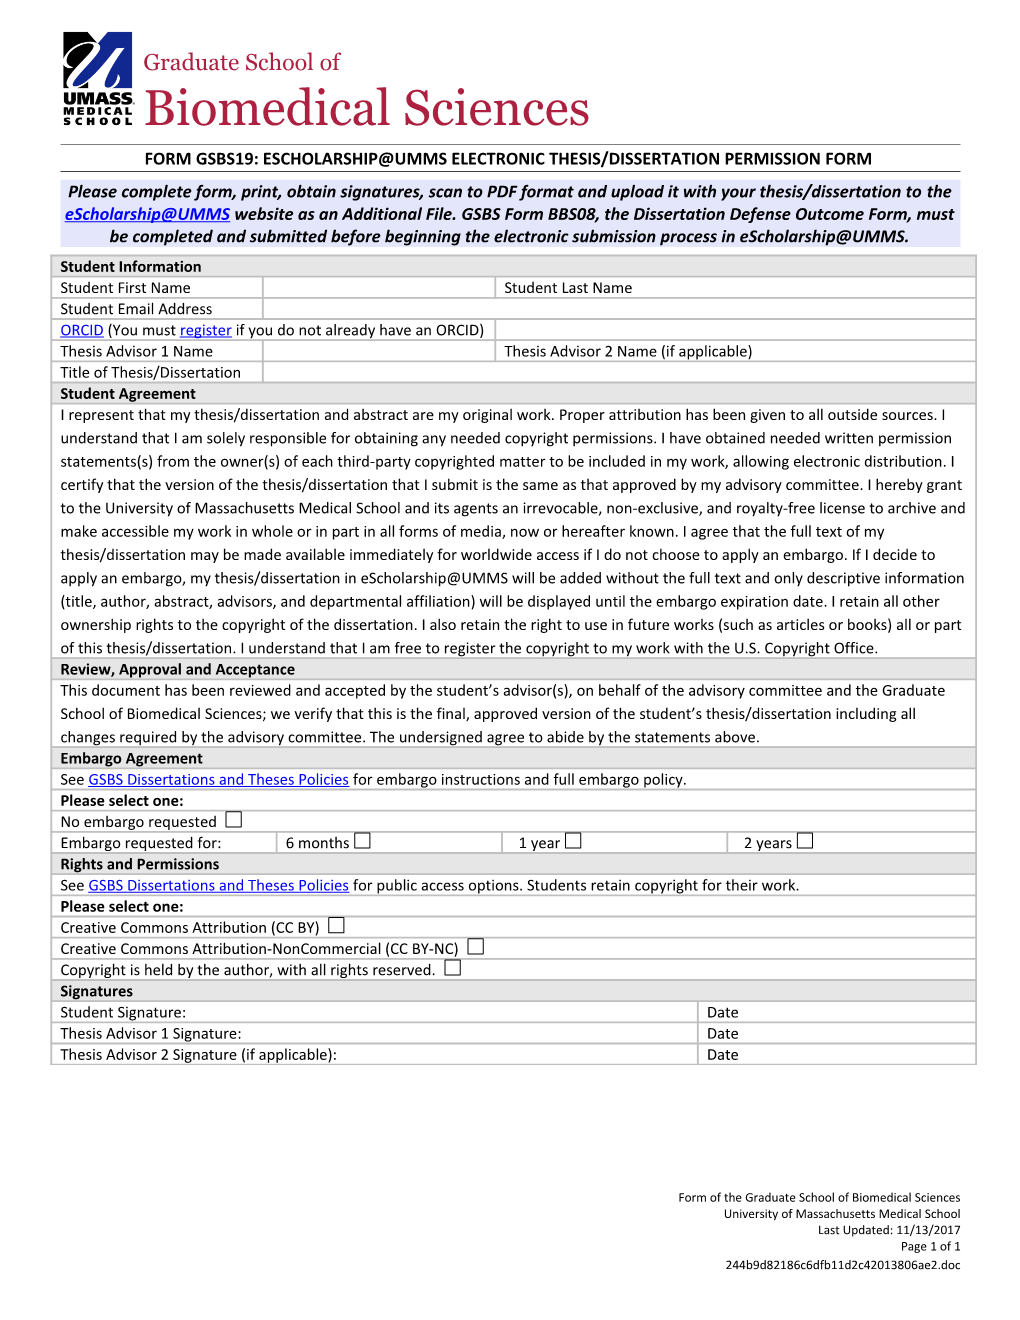 Form Gsbs19: Escholarship Umms Electronic Thesis/Dissertation Permission Form